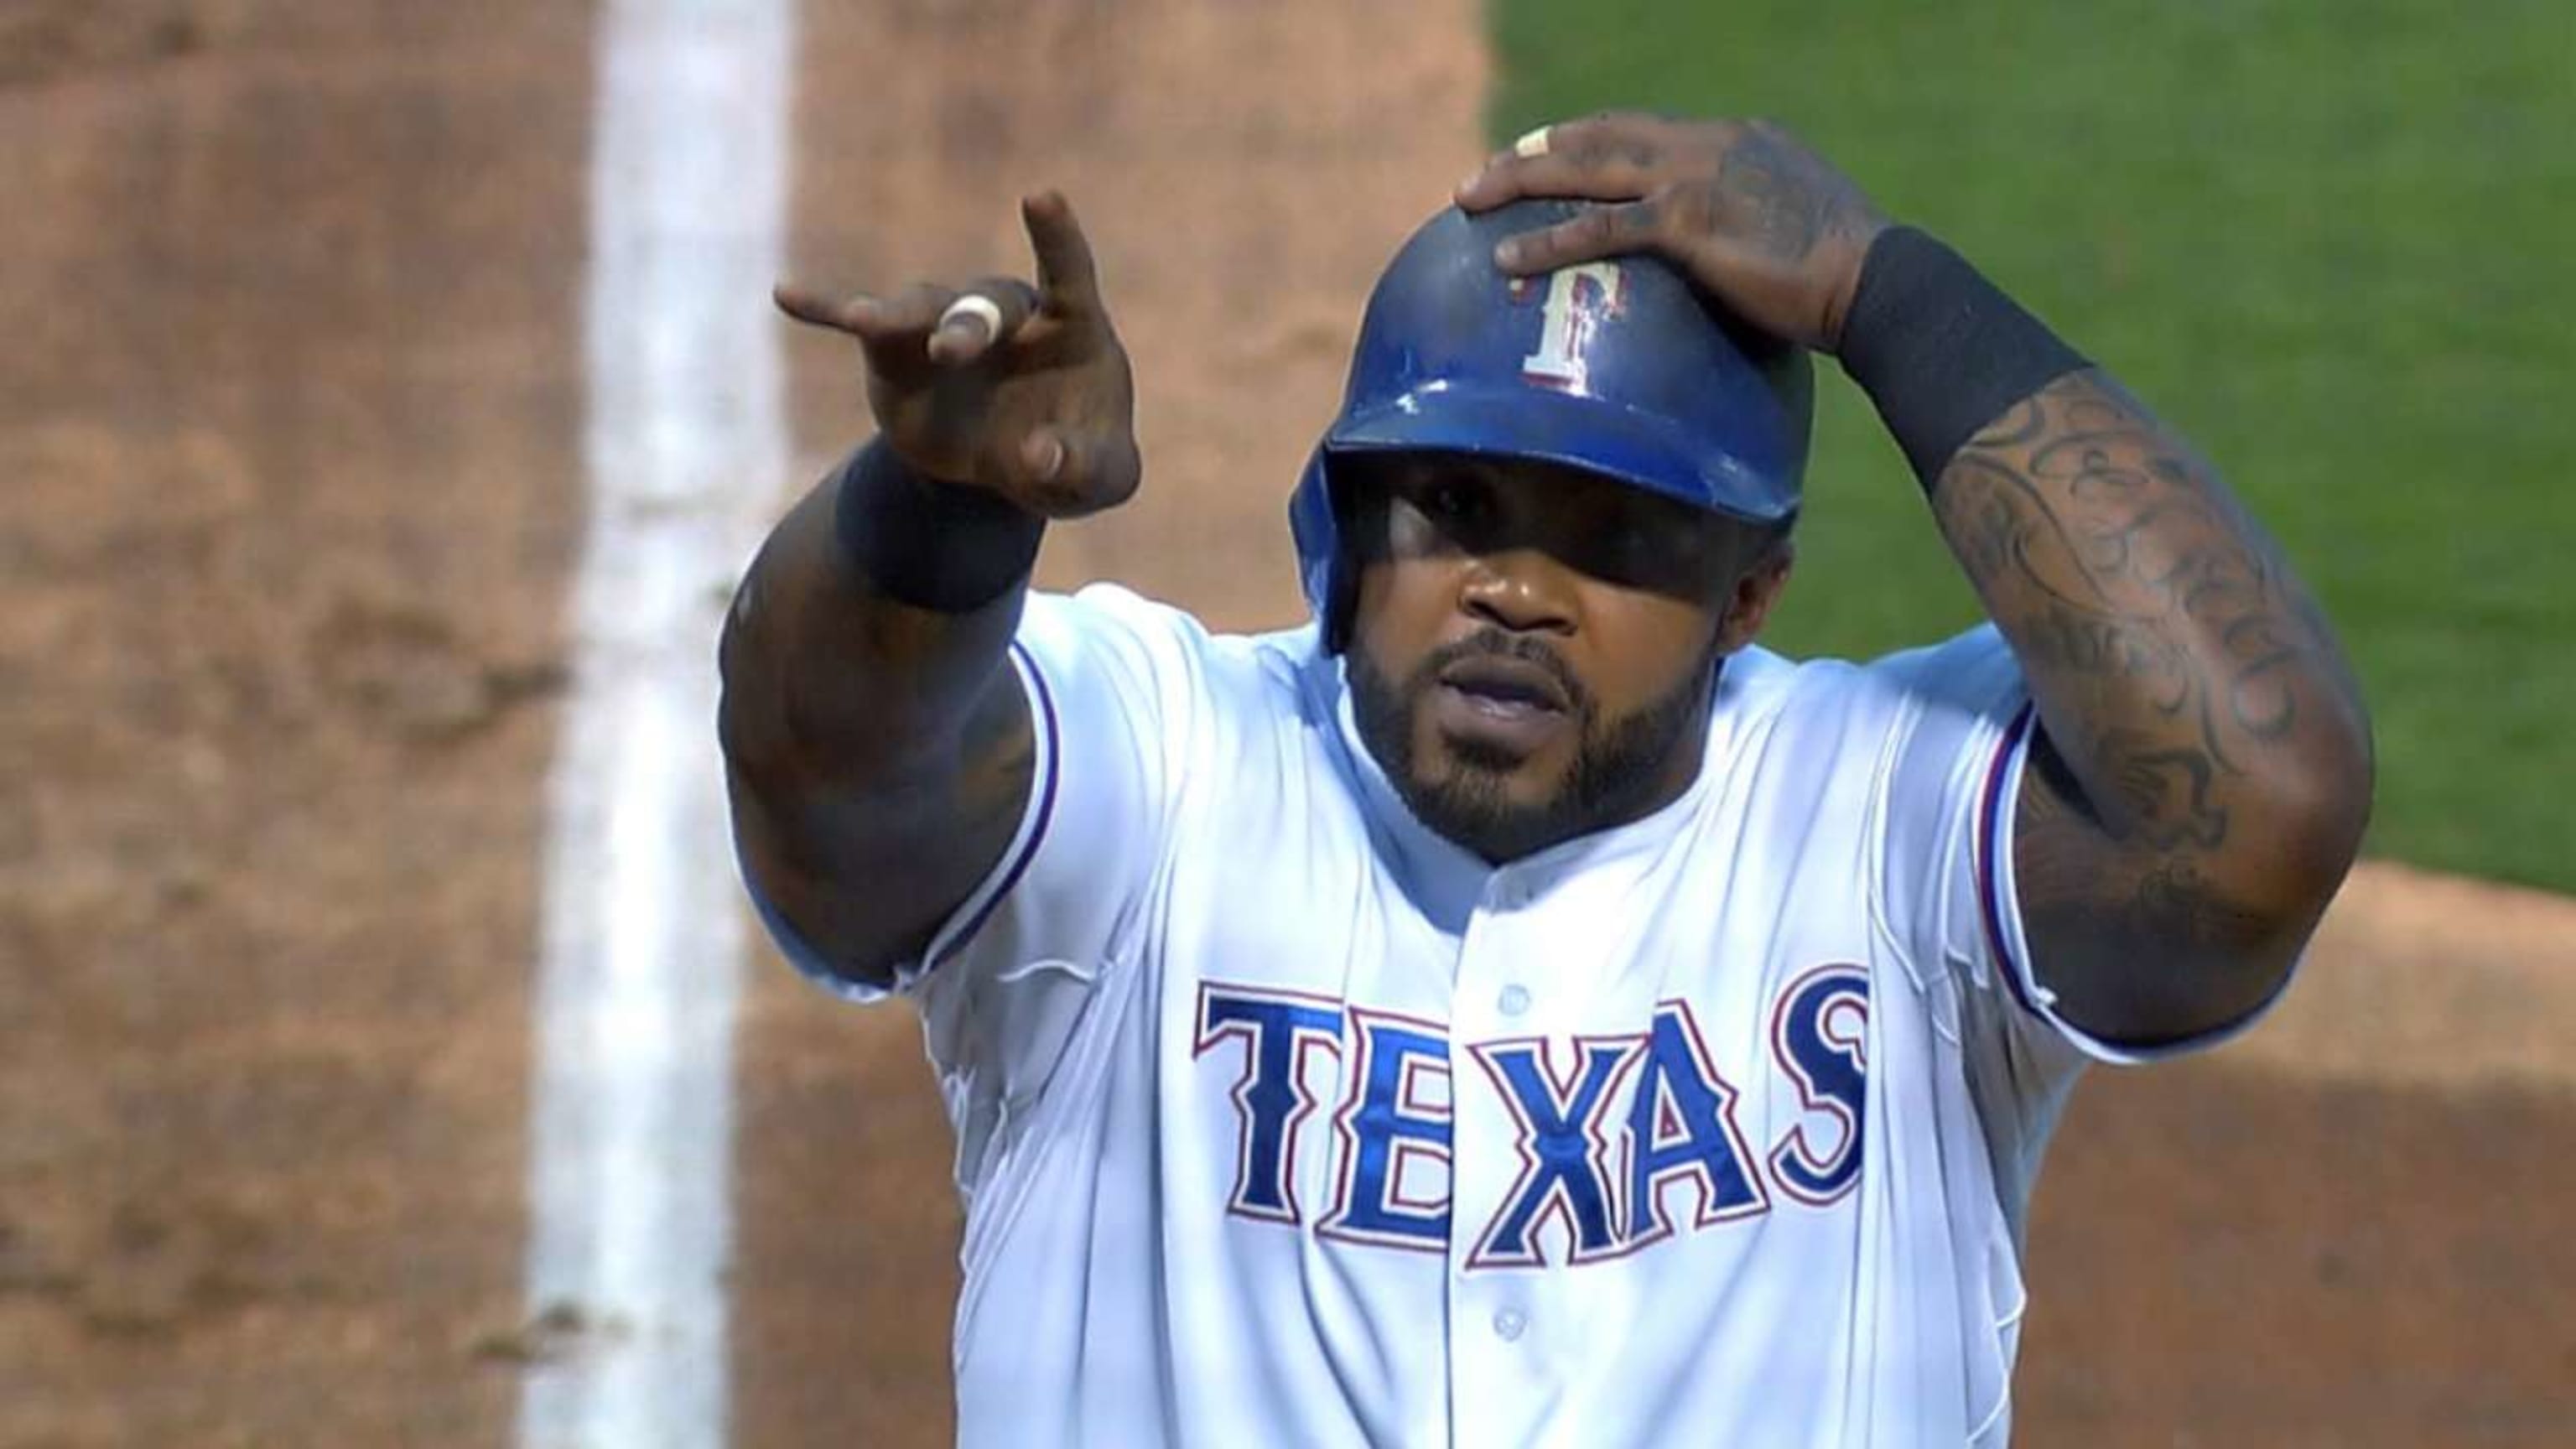 Prince Fielder announces playing career over